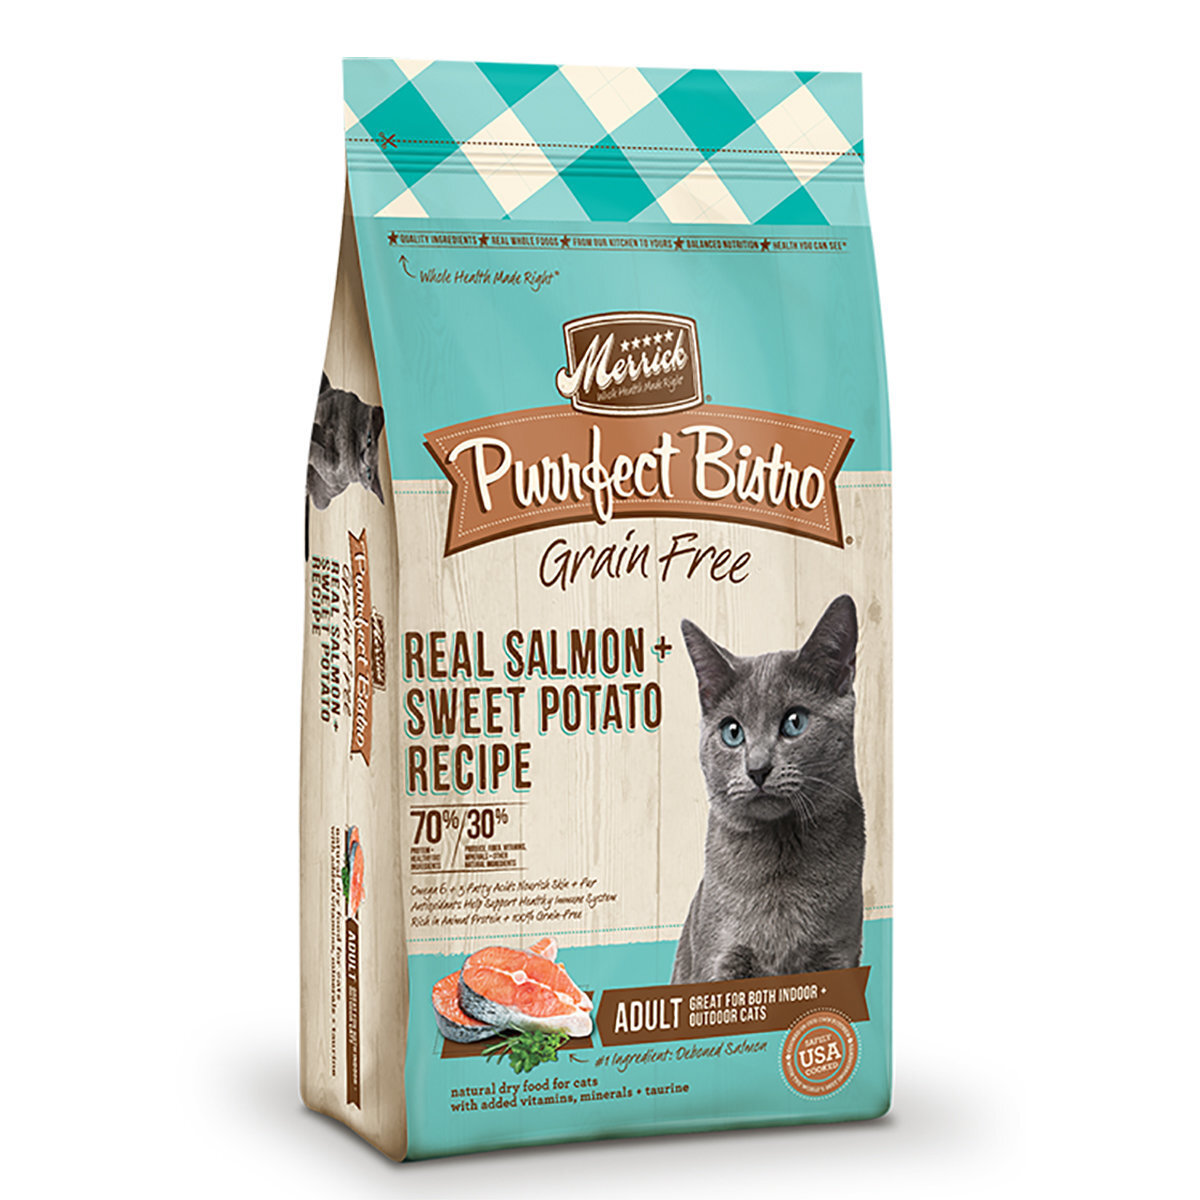 Grain Free Purrfect Bistro Real Salmon Recipe Adult Cat Dry Food 4lb